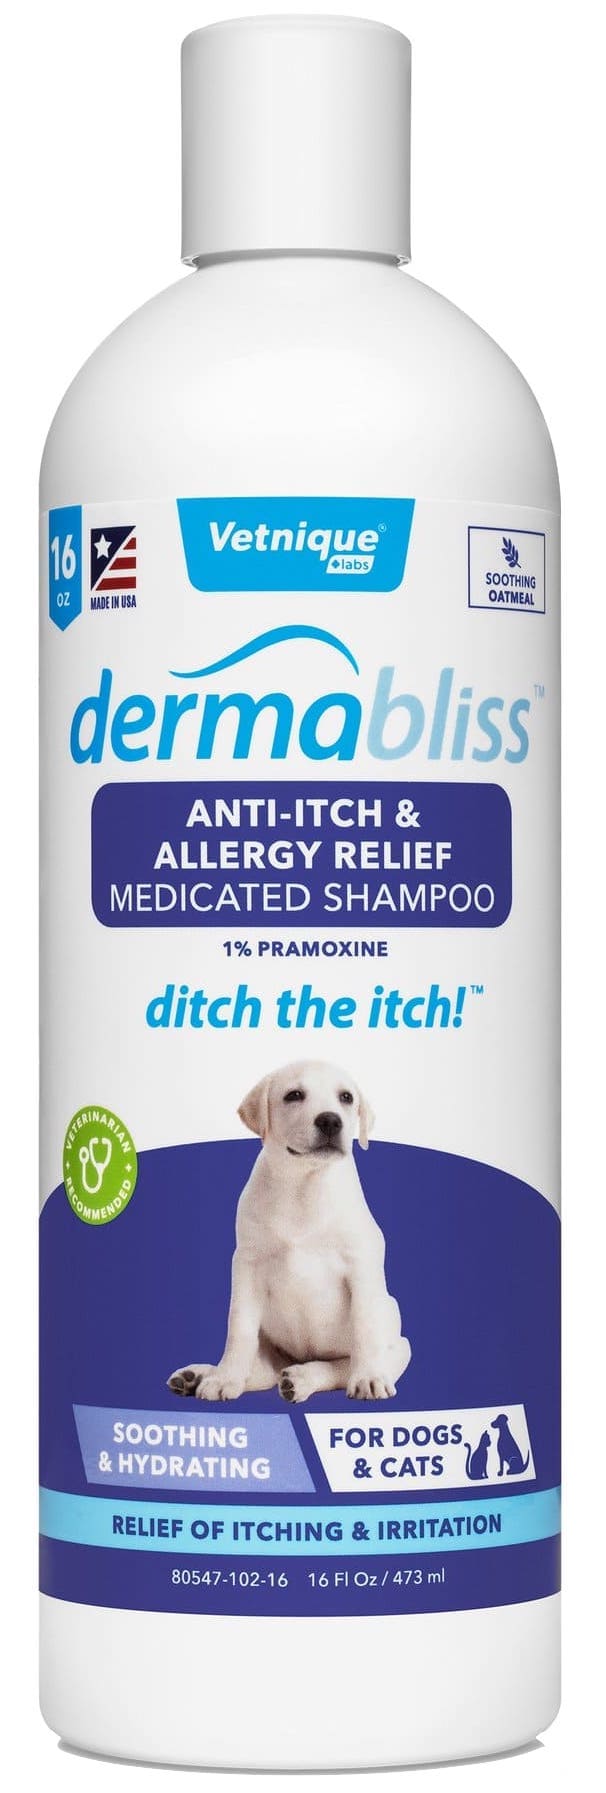 Dermabliss Anti-Itch & Allergy Relief Medicated Shampoo